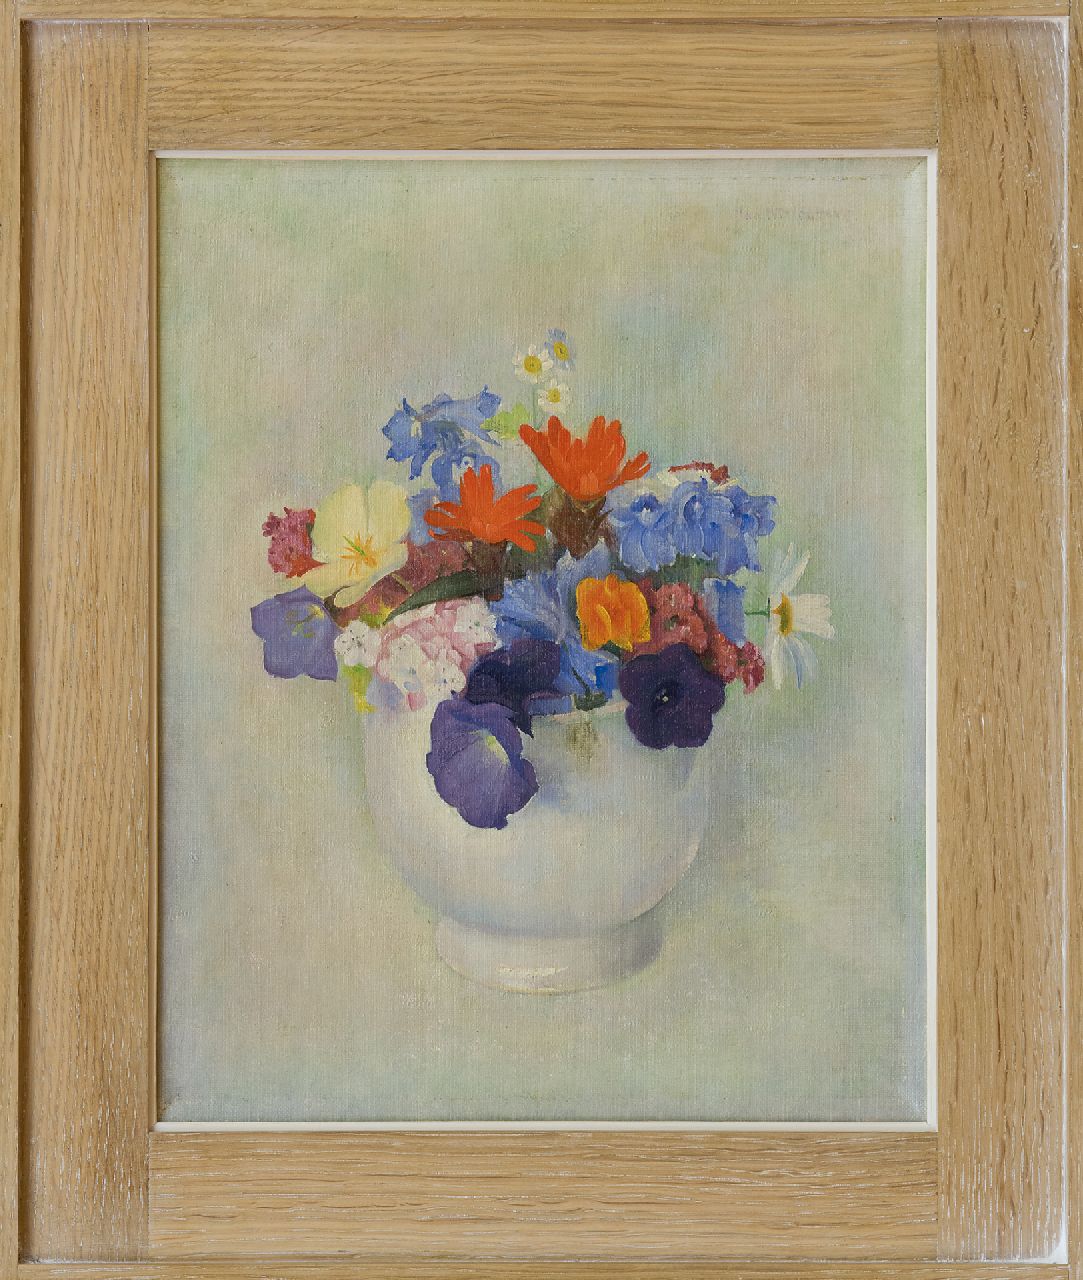 Wittenberg J.H.W.  | 'Jan' Hendrik Willem Wittenberg, Flower still life, oil on canvas 29.8 x 24.0 cm, signed u.r. and painted ca. 1940